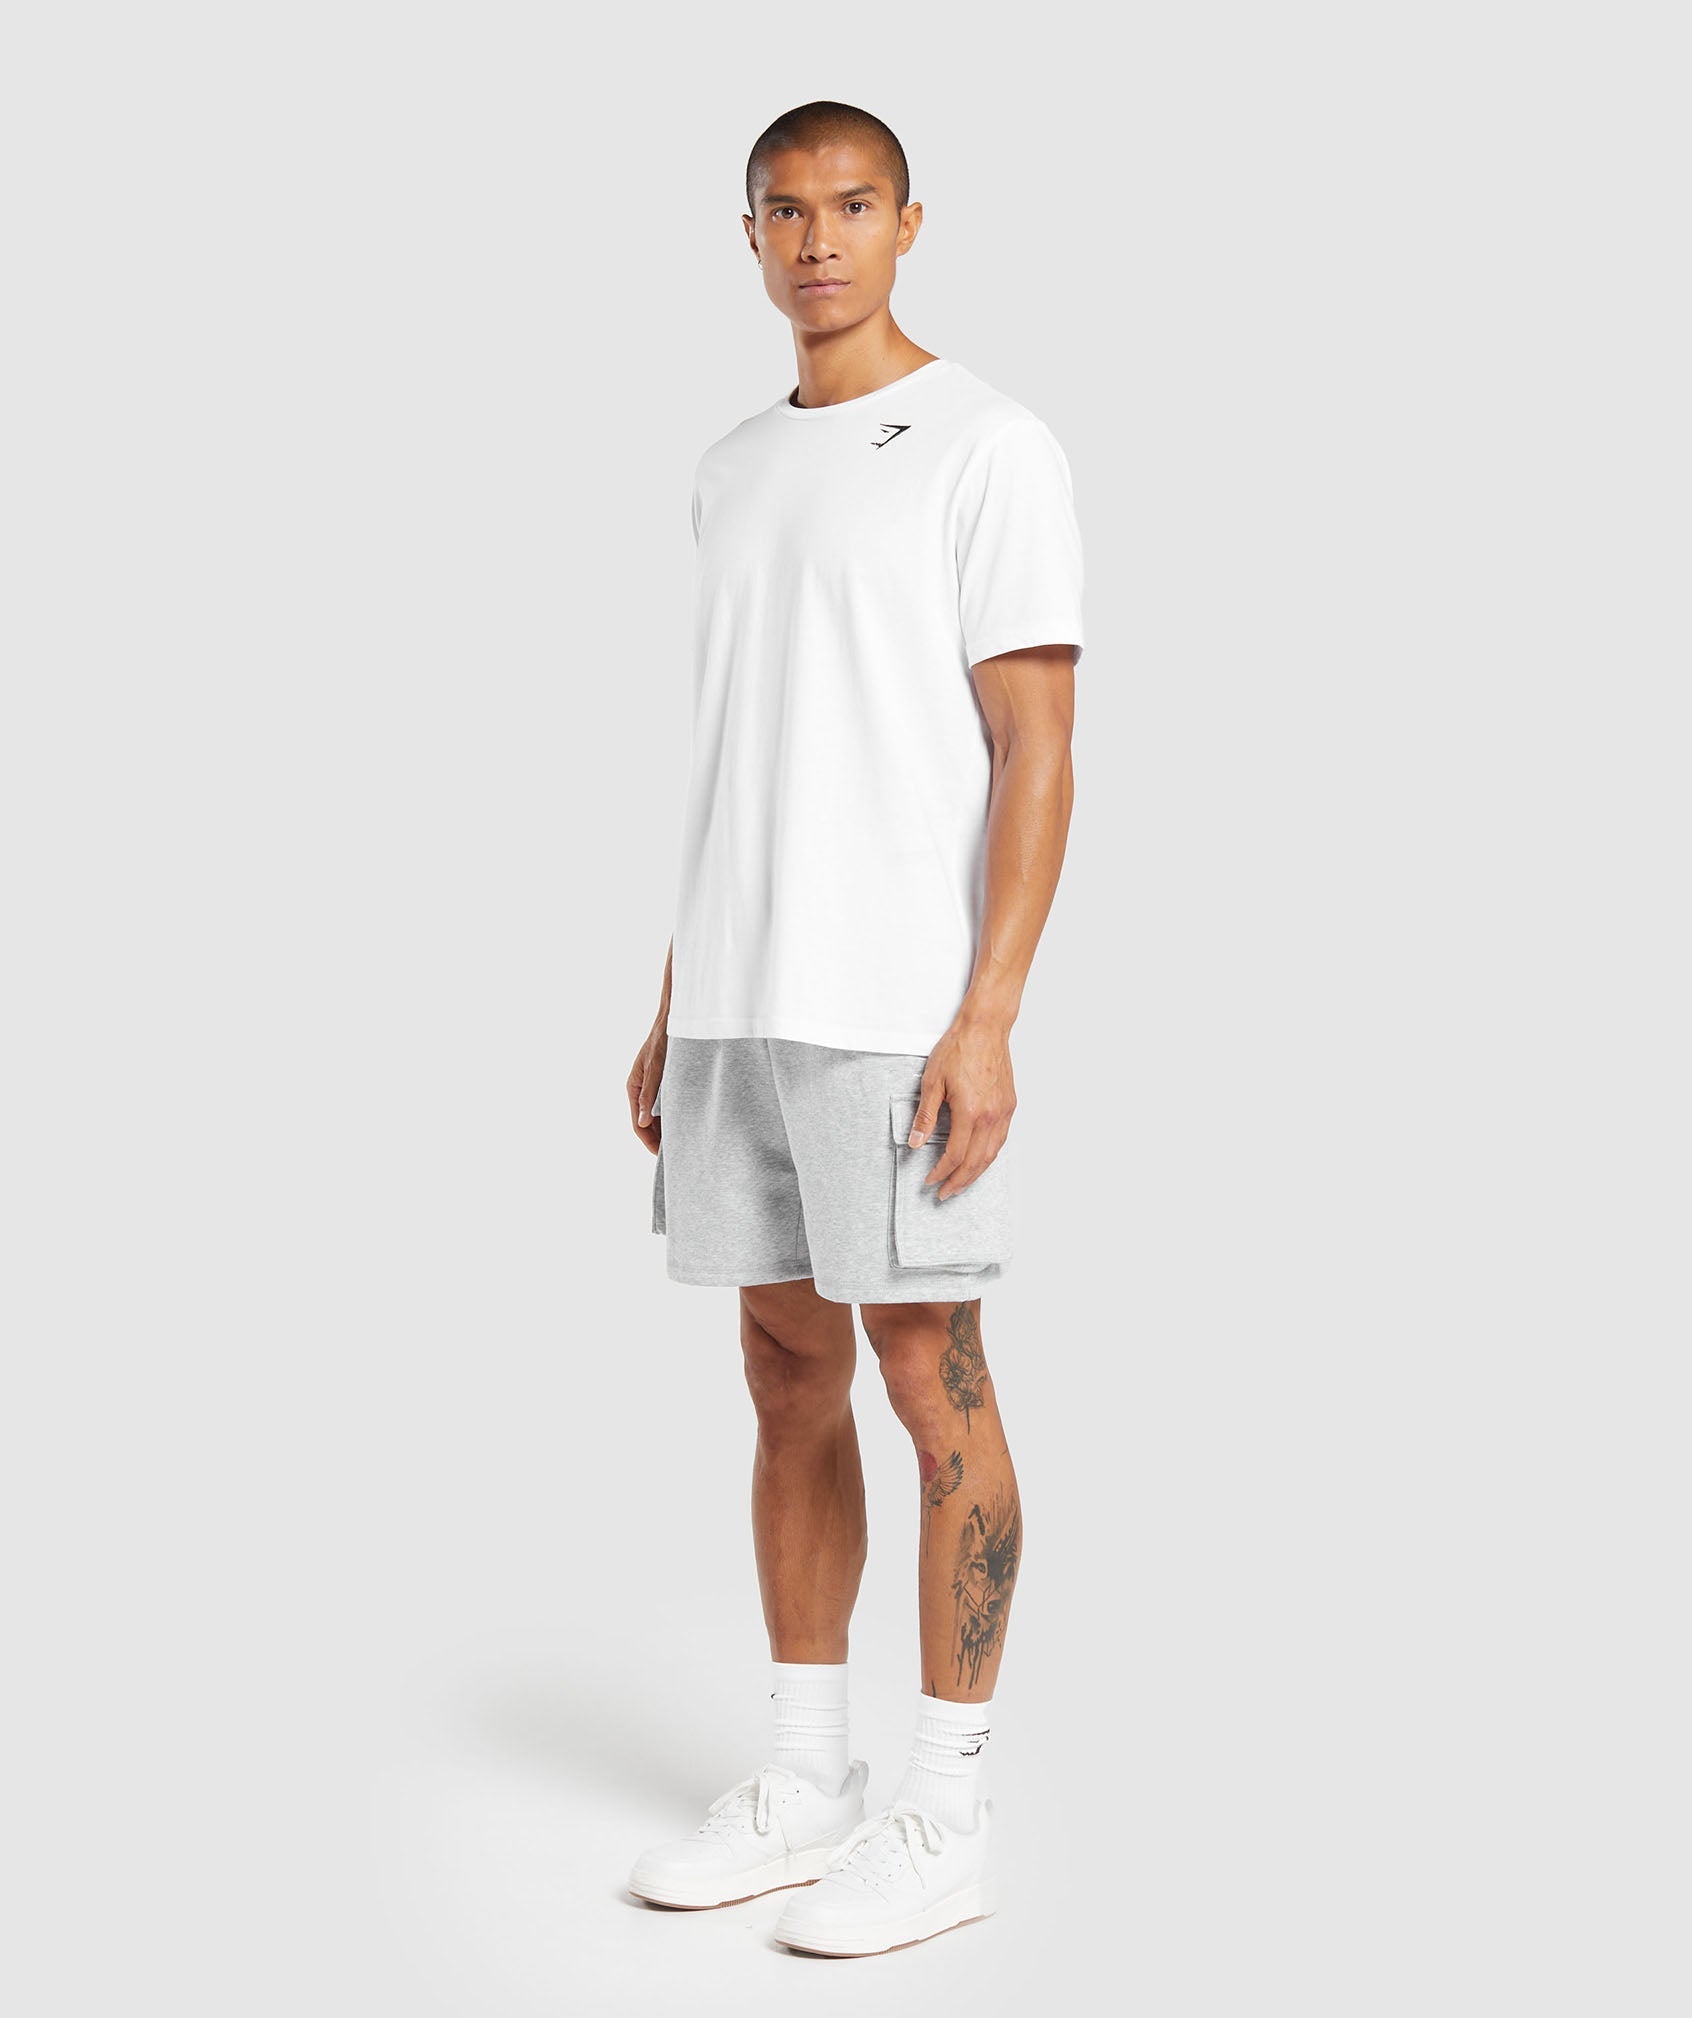 Crest Cargo Shorts in Light Grey Marl - view 4